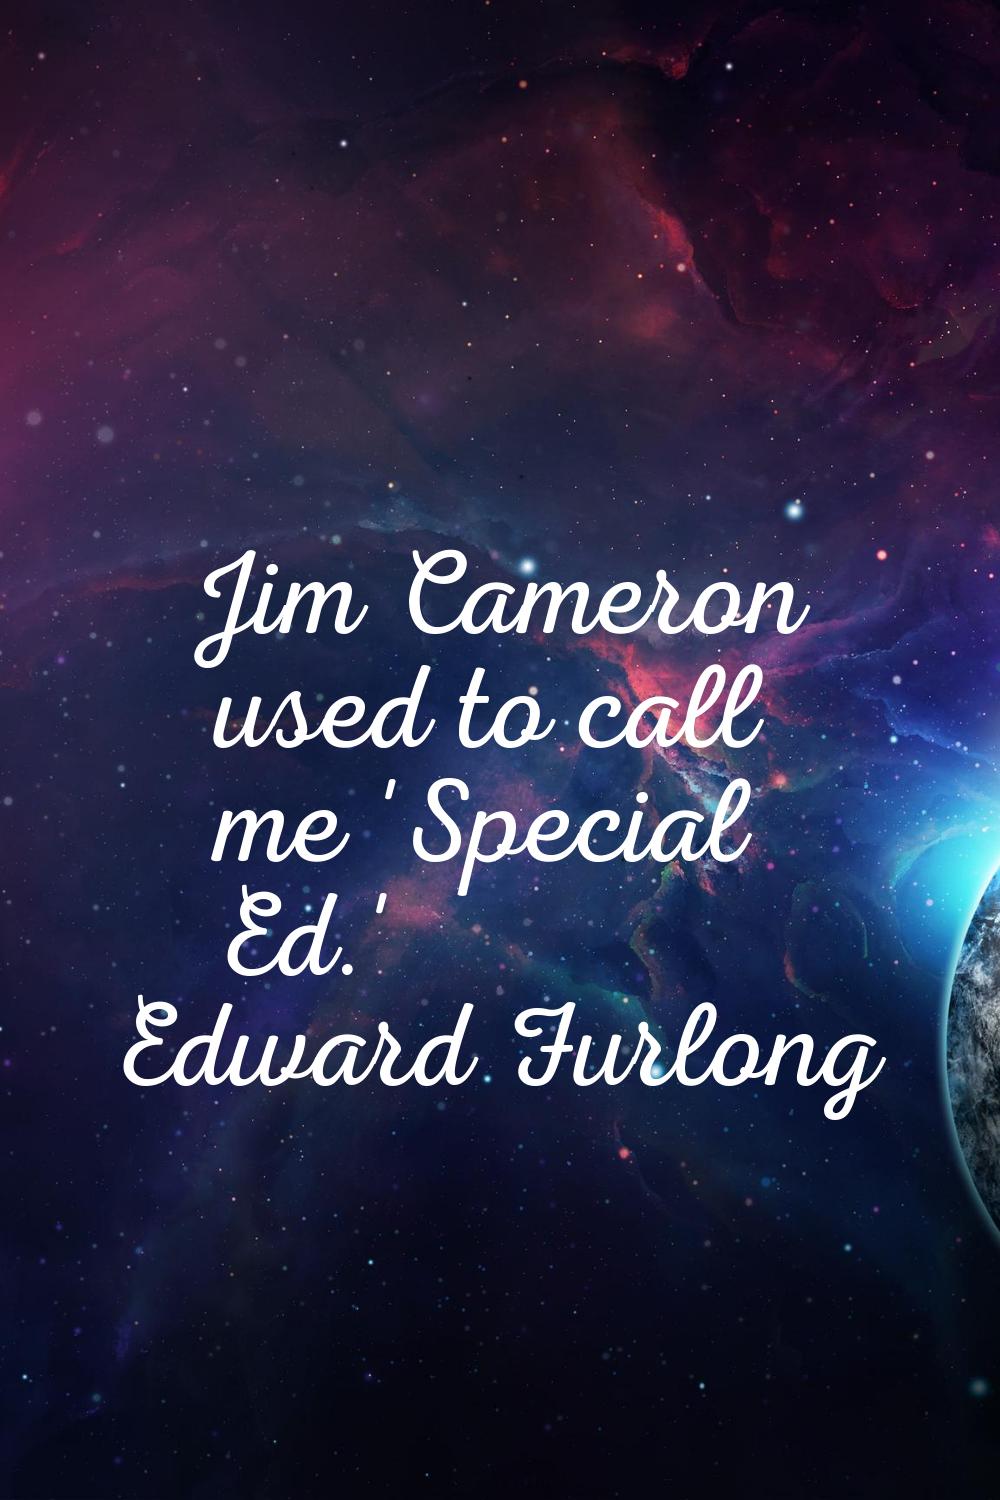 Jim Cameron used to call me 'Special Ed.'